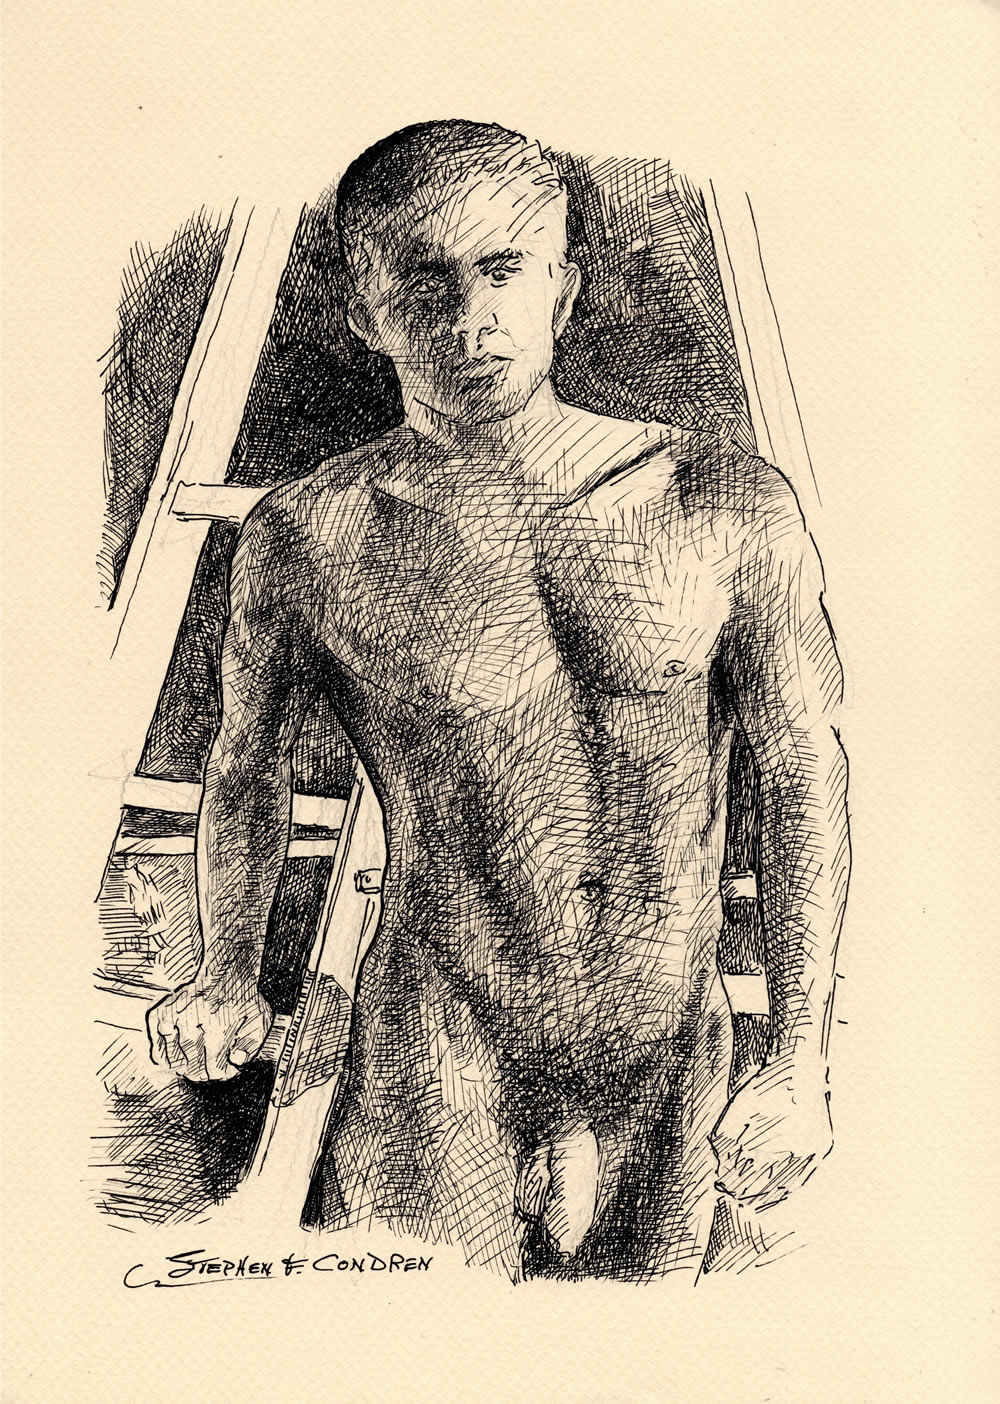 Pen & ink figure drawing of nude gay man standing. He has a hard body with muscular torso and 6-pack set of abs.